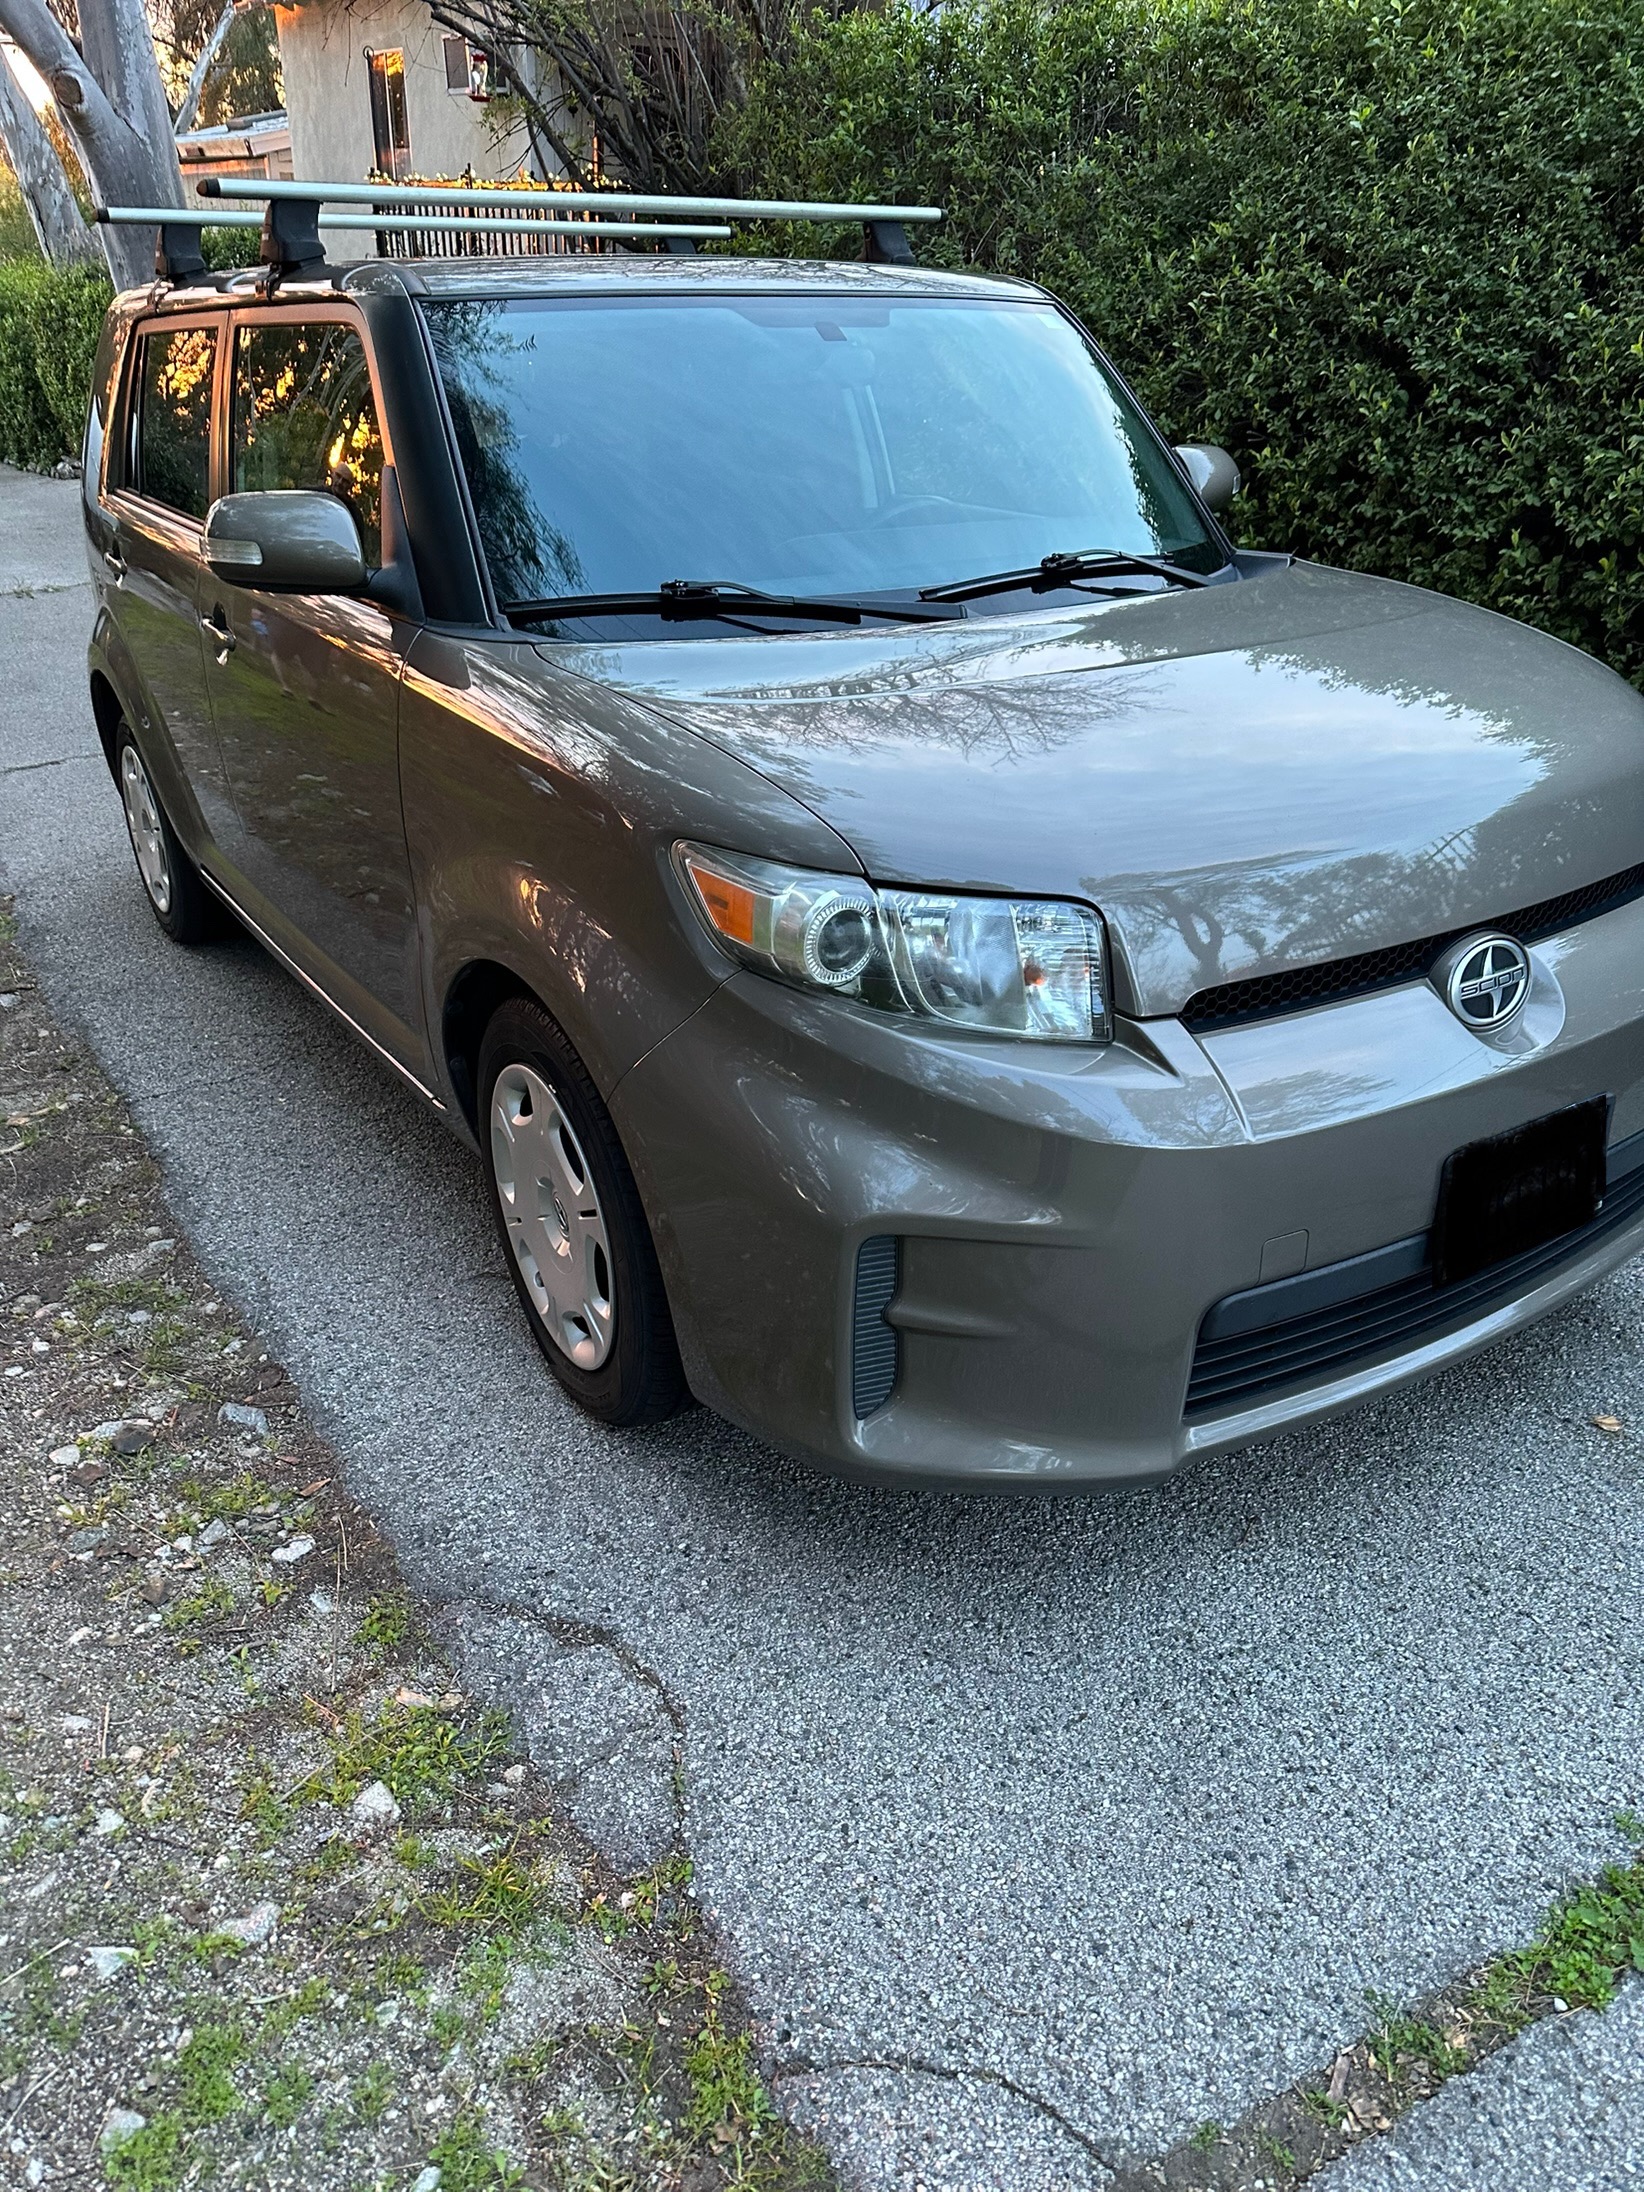 Used 2012 Scion xB for Sale in Los Angeles, CA (Test Drive at Home) -  Kelley Blue Book